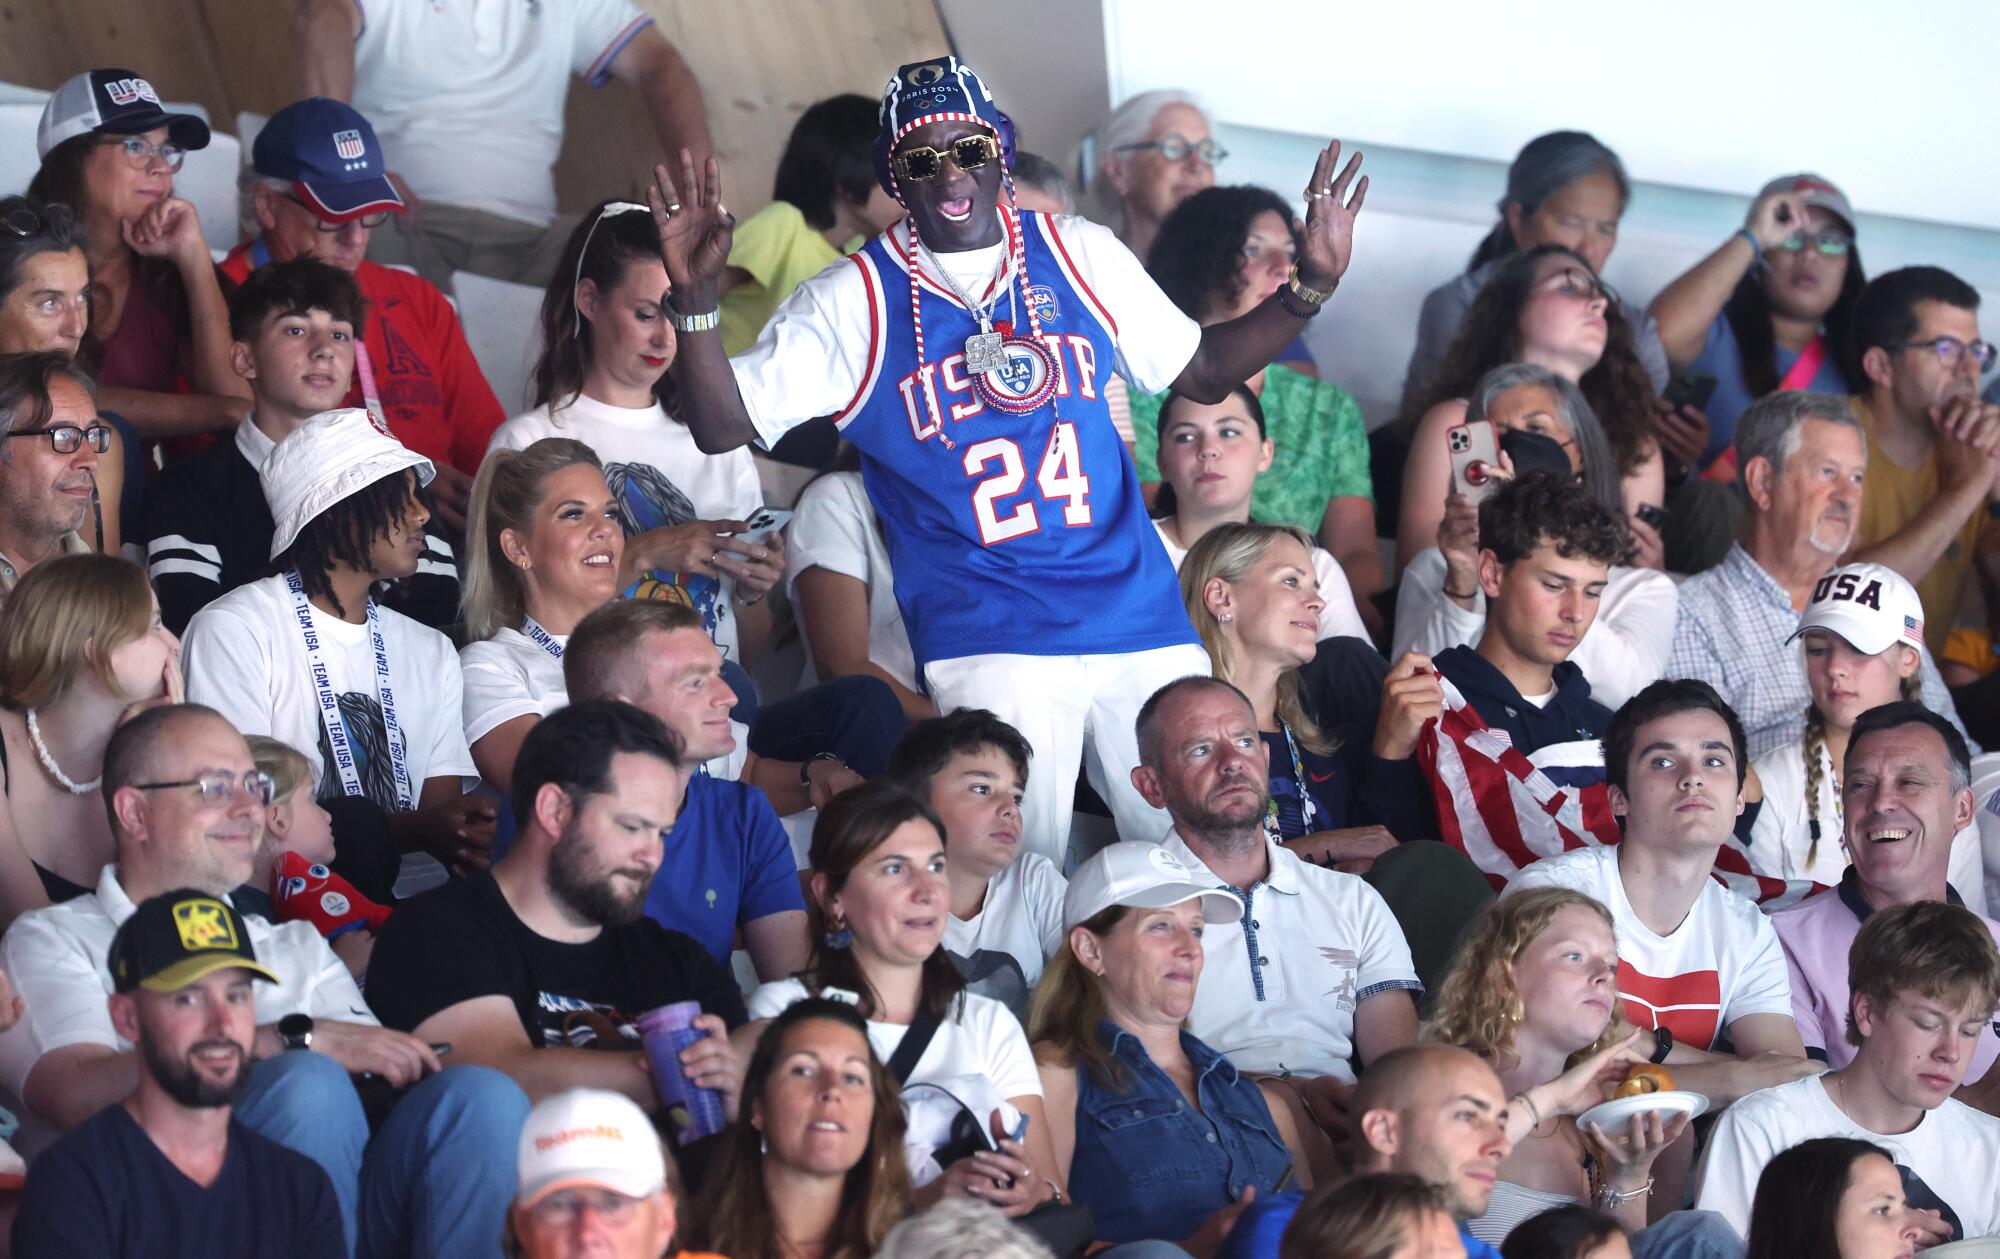 Rapper Flavor Flav cheers in the stands for the USA team during a water polo match against Greece.